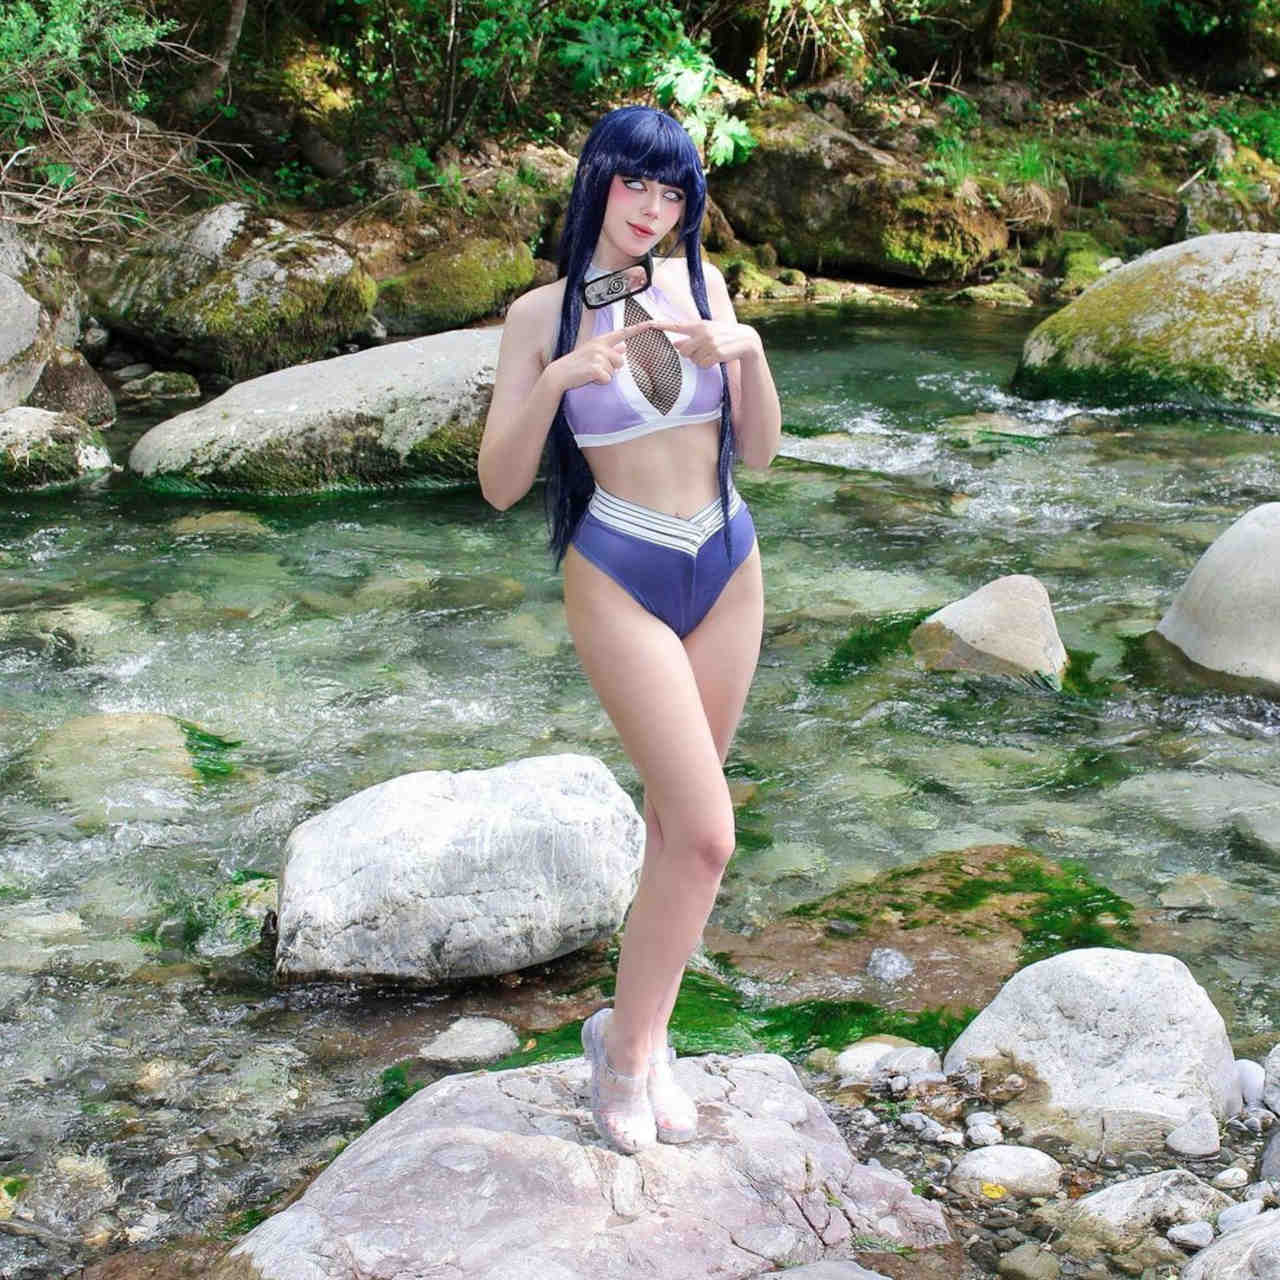 Hinata cooled off in the river with a cosplay ideal for the heat